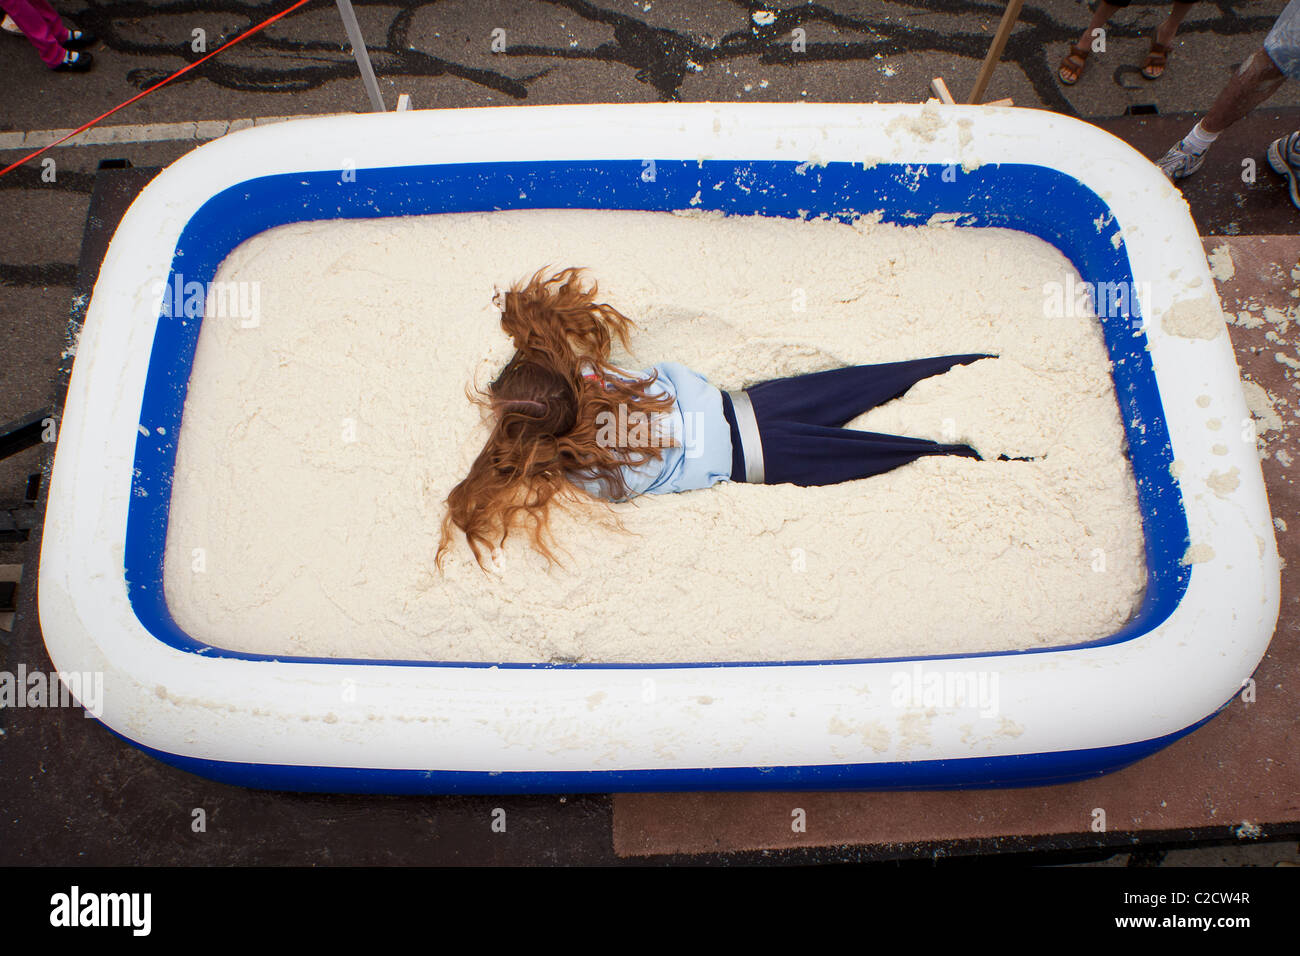 A participant in the Grits Roll wallows in a pool of grits during the annual World Grits Festival in St George, SC Stock Photo